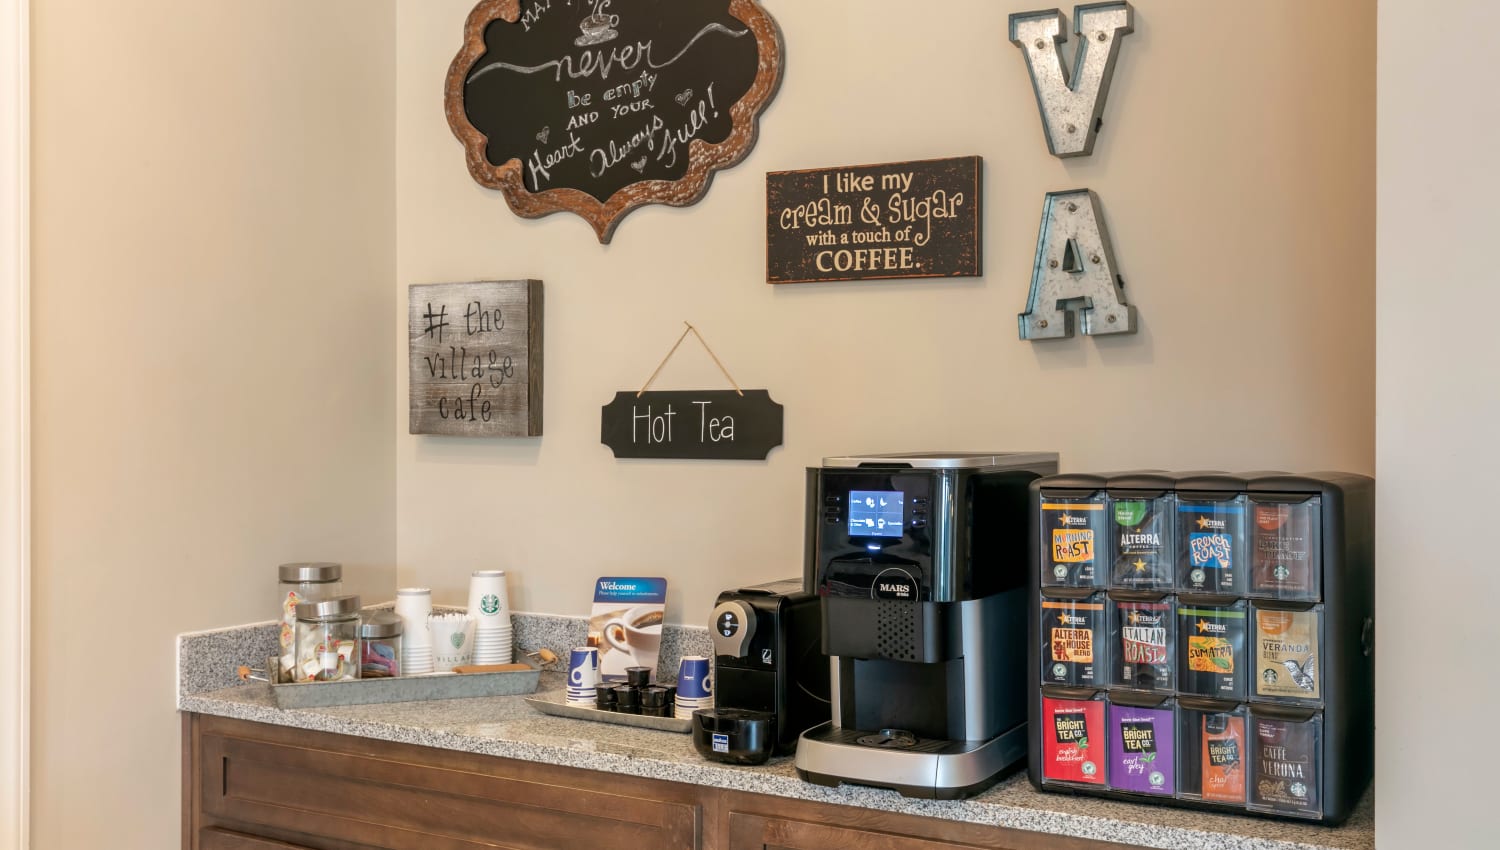 Coffee station in the resident clubhouse at The Village at Apison Pike in Ooltewah, Tennessee